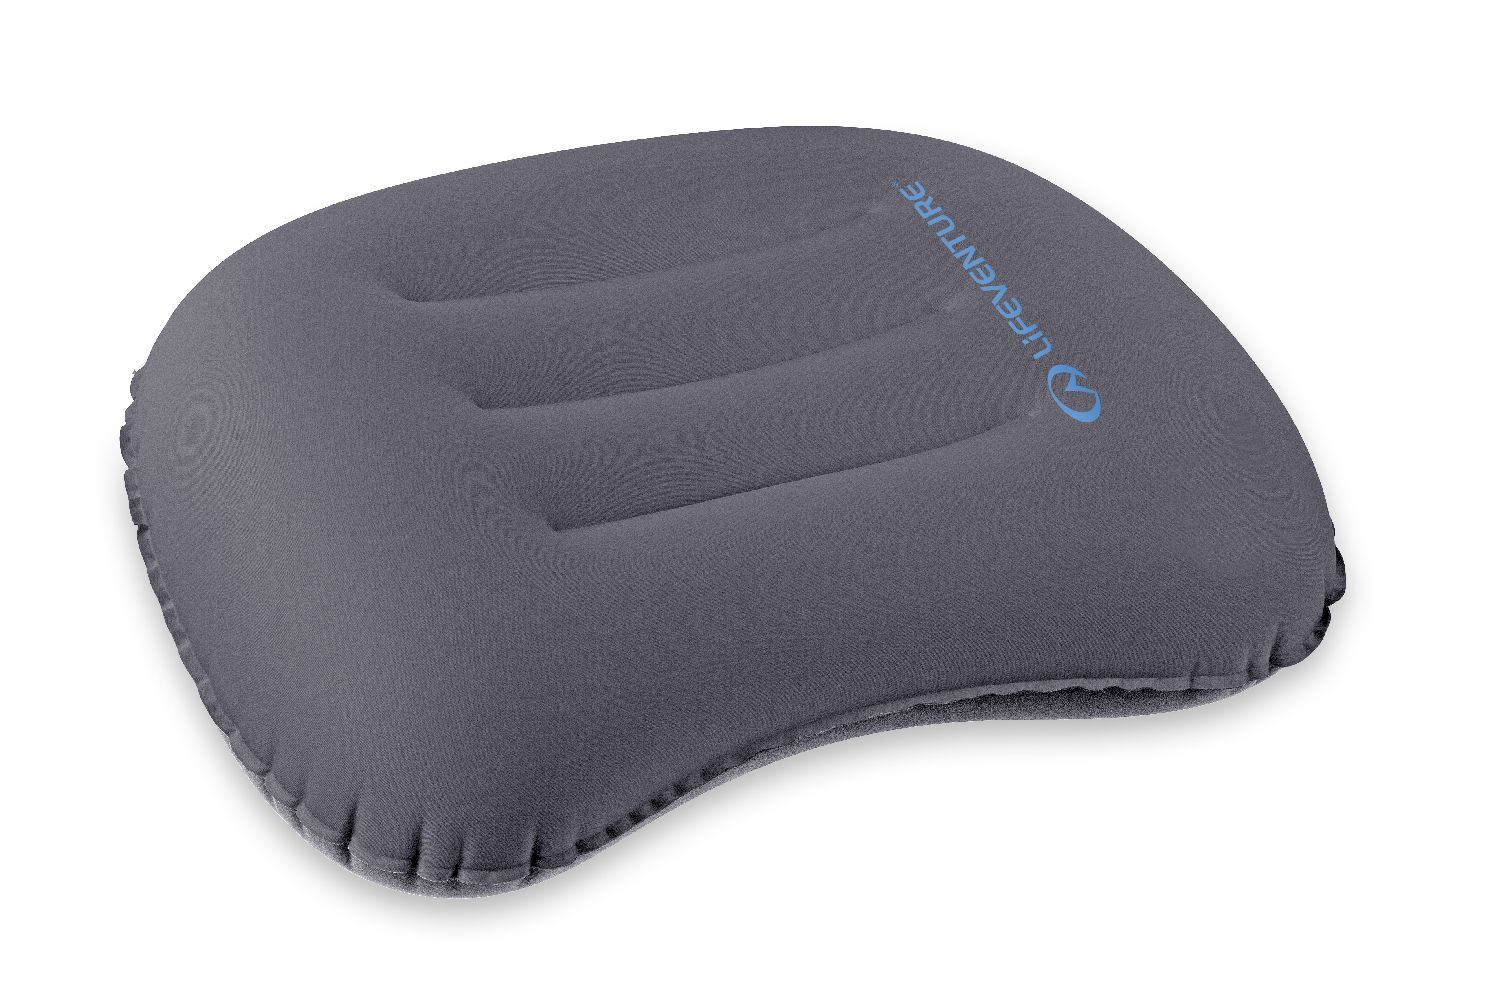 LittleLife Inflatable Pillow - Cuscino